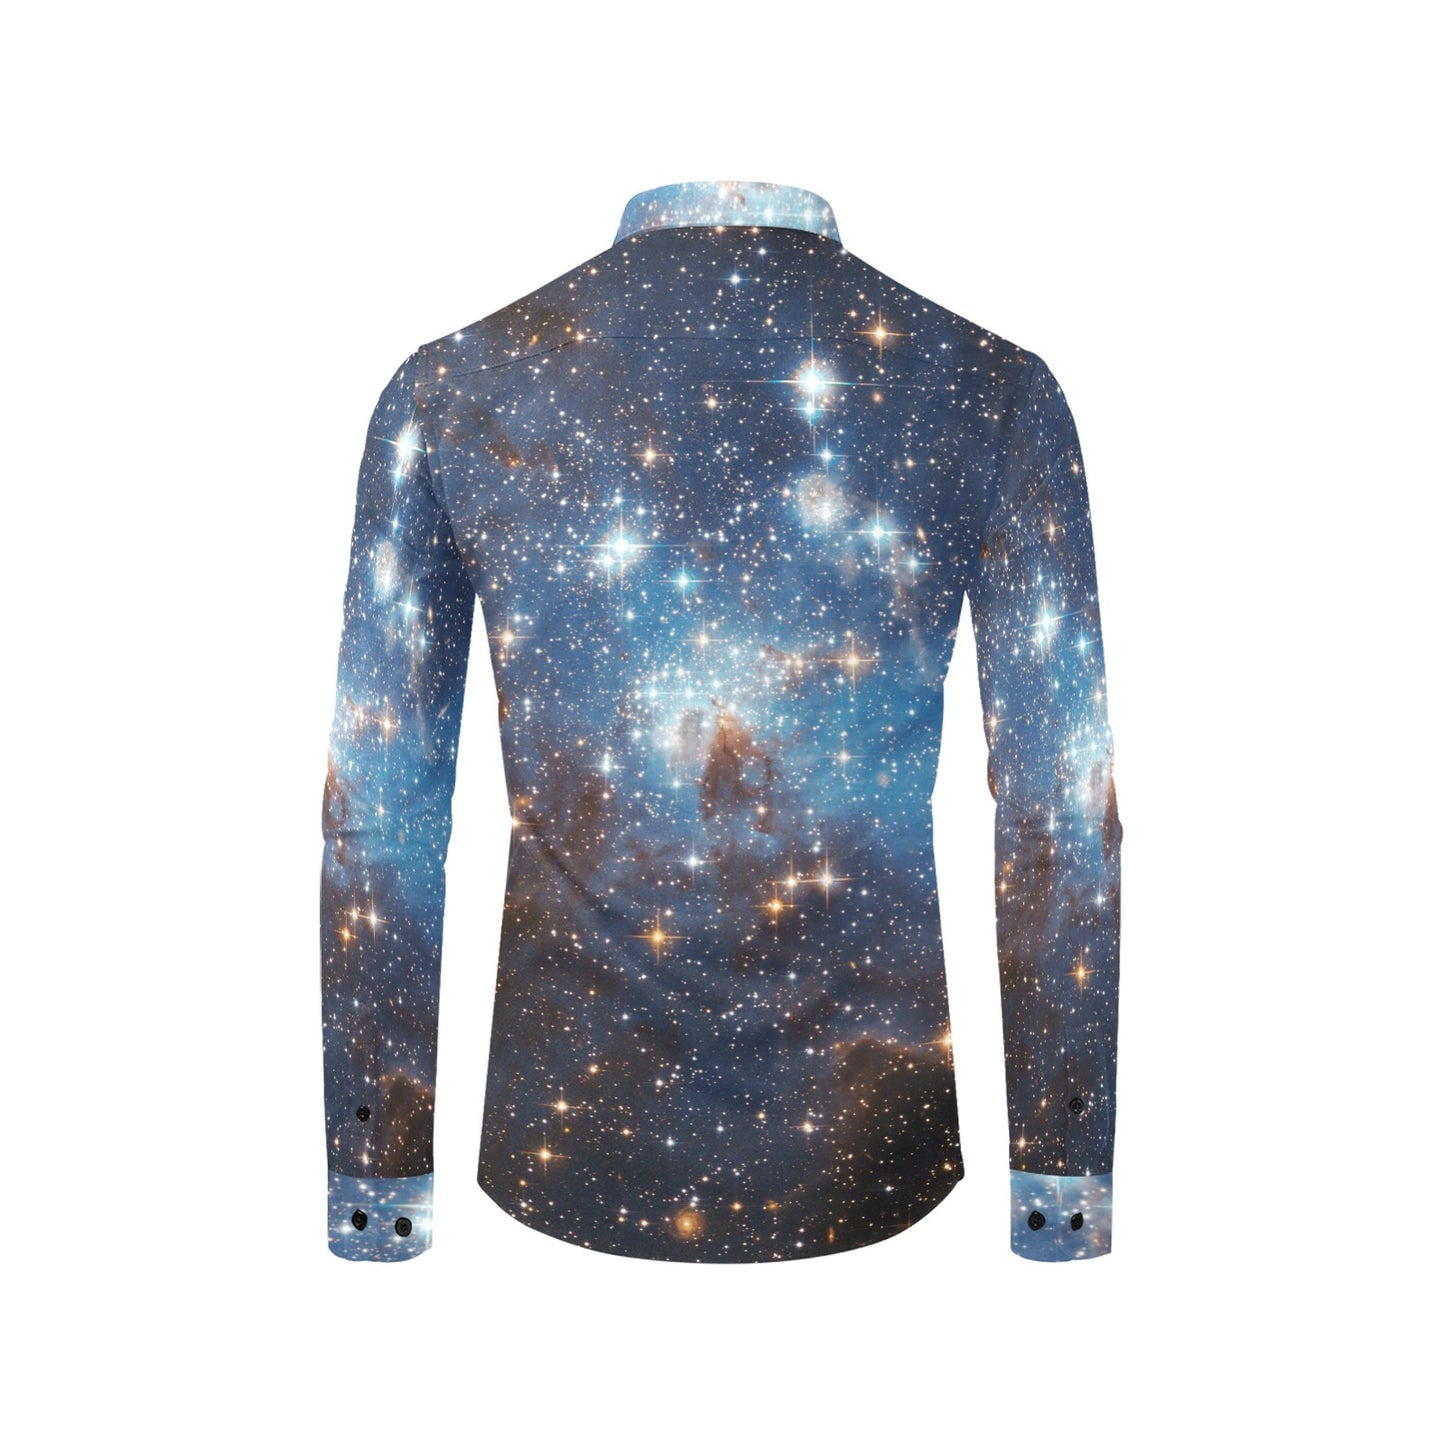 Starcove Galaxy Long Sleeve Men Button Up Shirt, Space Nebula Geeky Stars Print Dress Buttoned Collared Casual Dress Shirt with Chest Pocket L